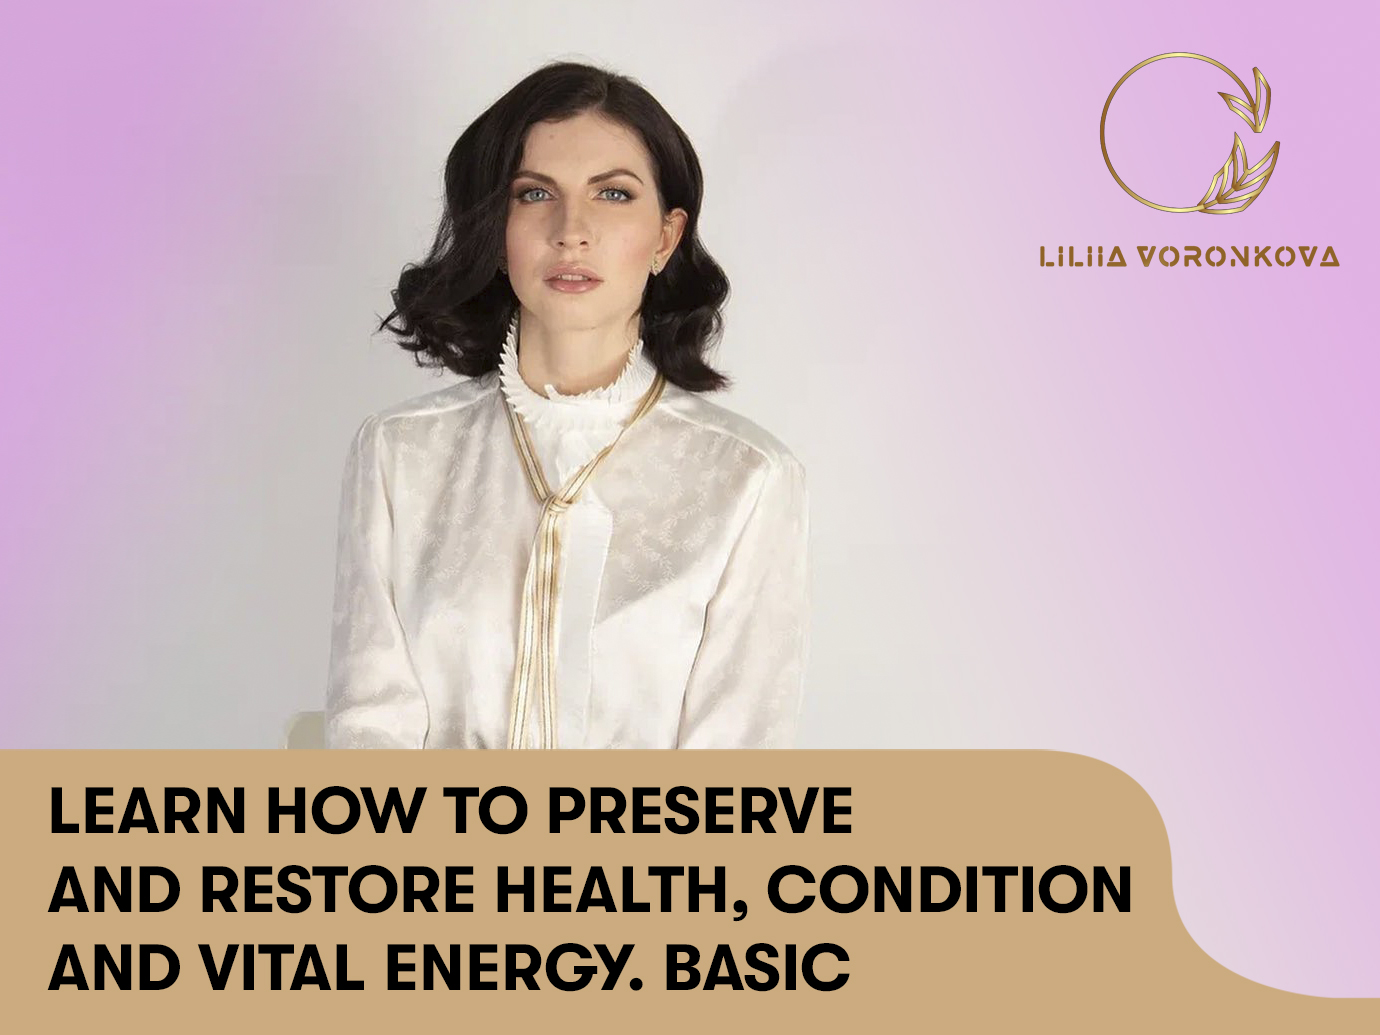 Learn how to preserve and restore health, condition and vital energy. Basic